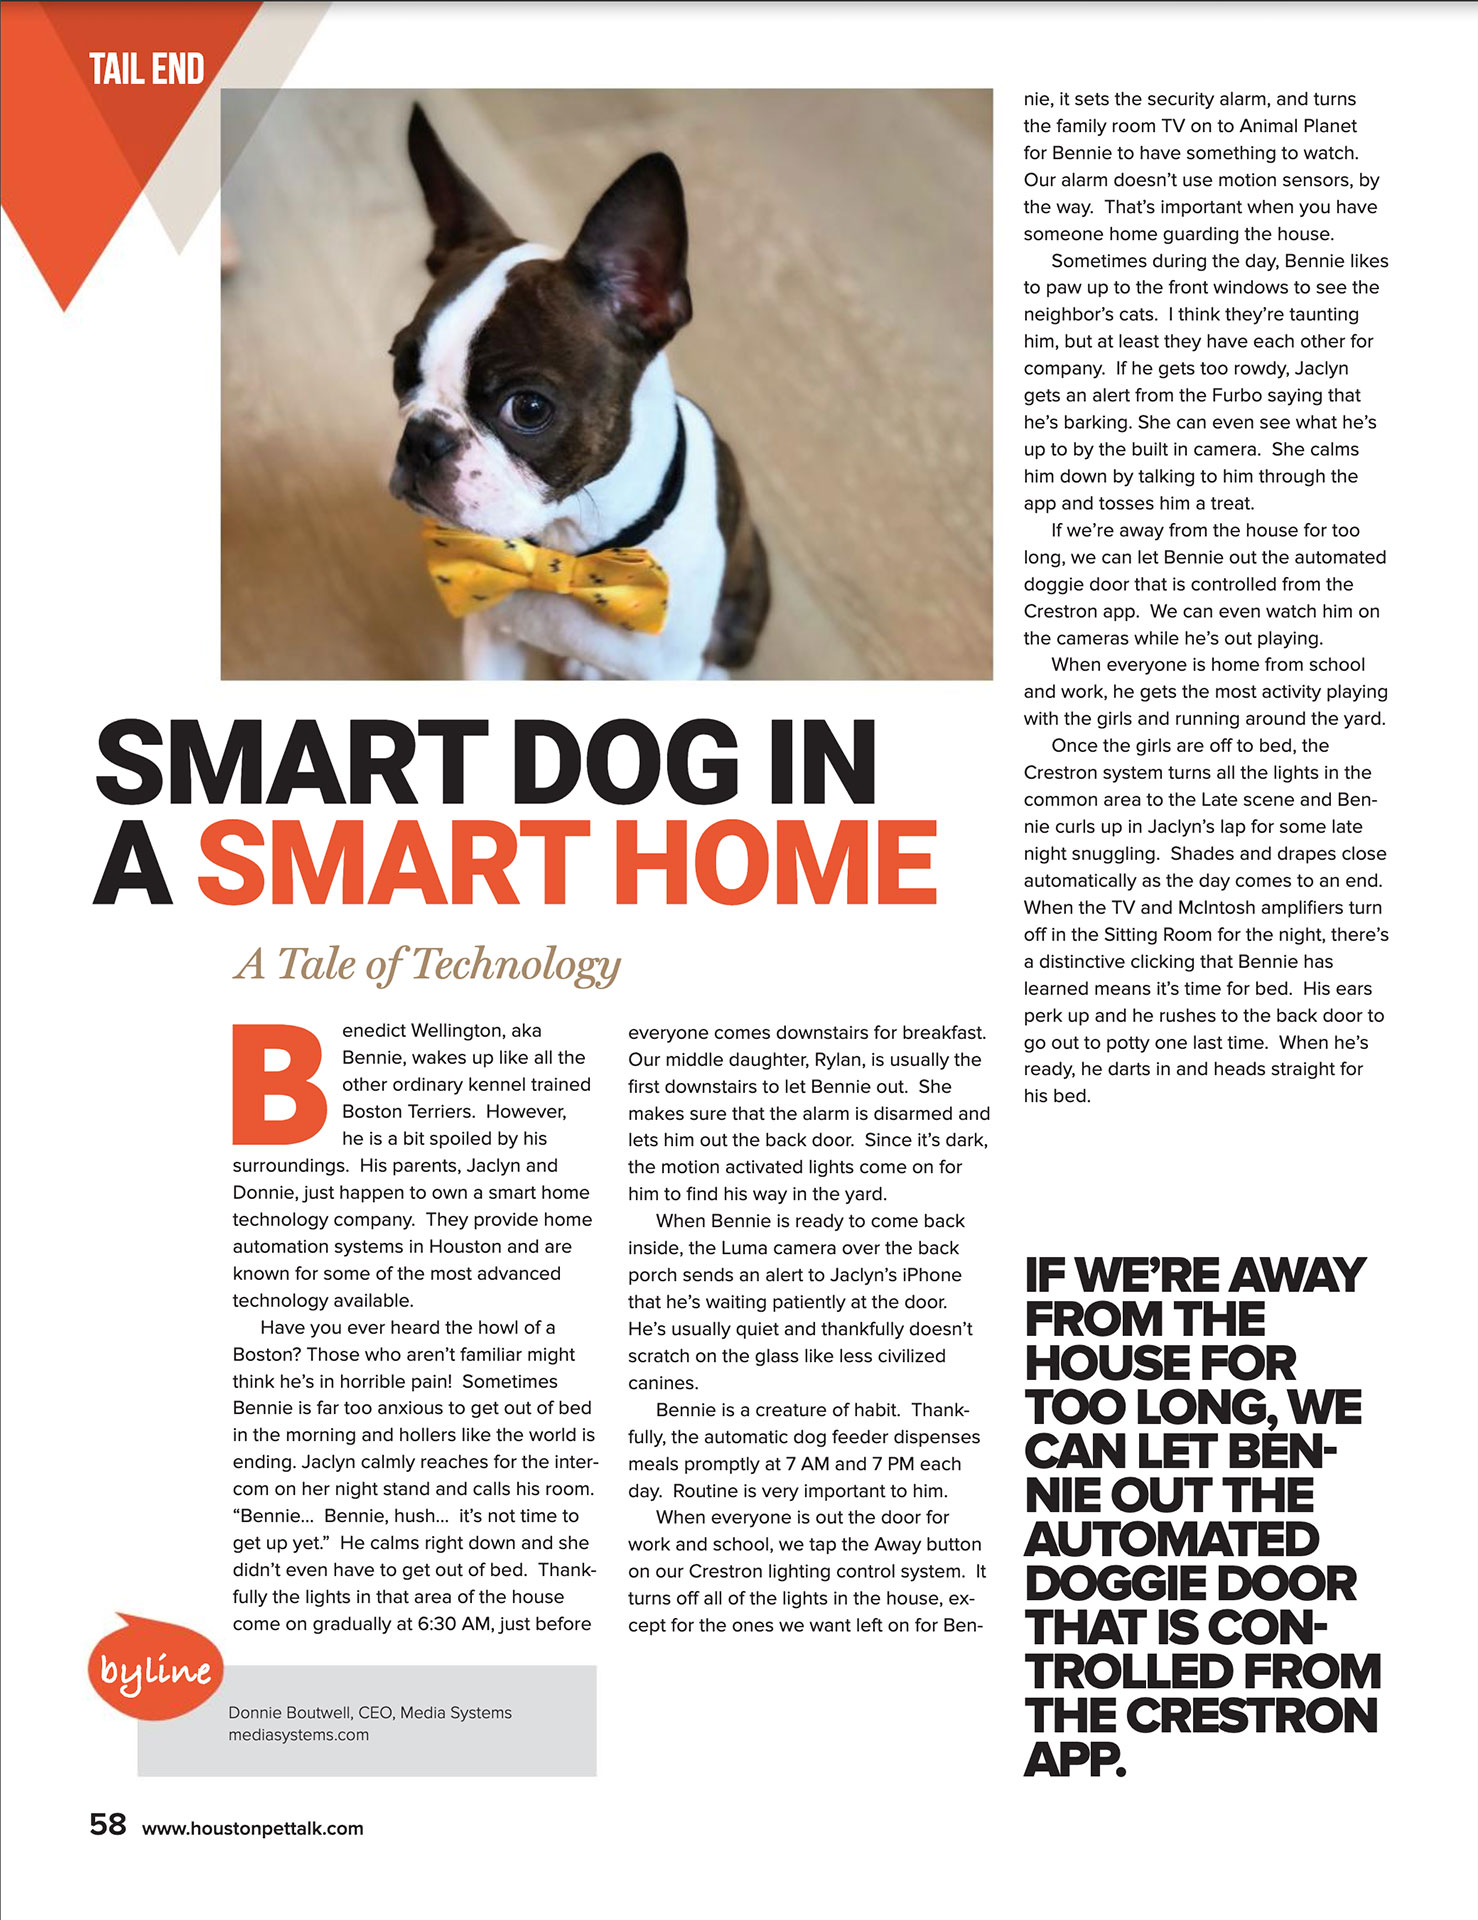 Image or Screenshot of Smart Dog in a Smart Home